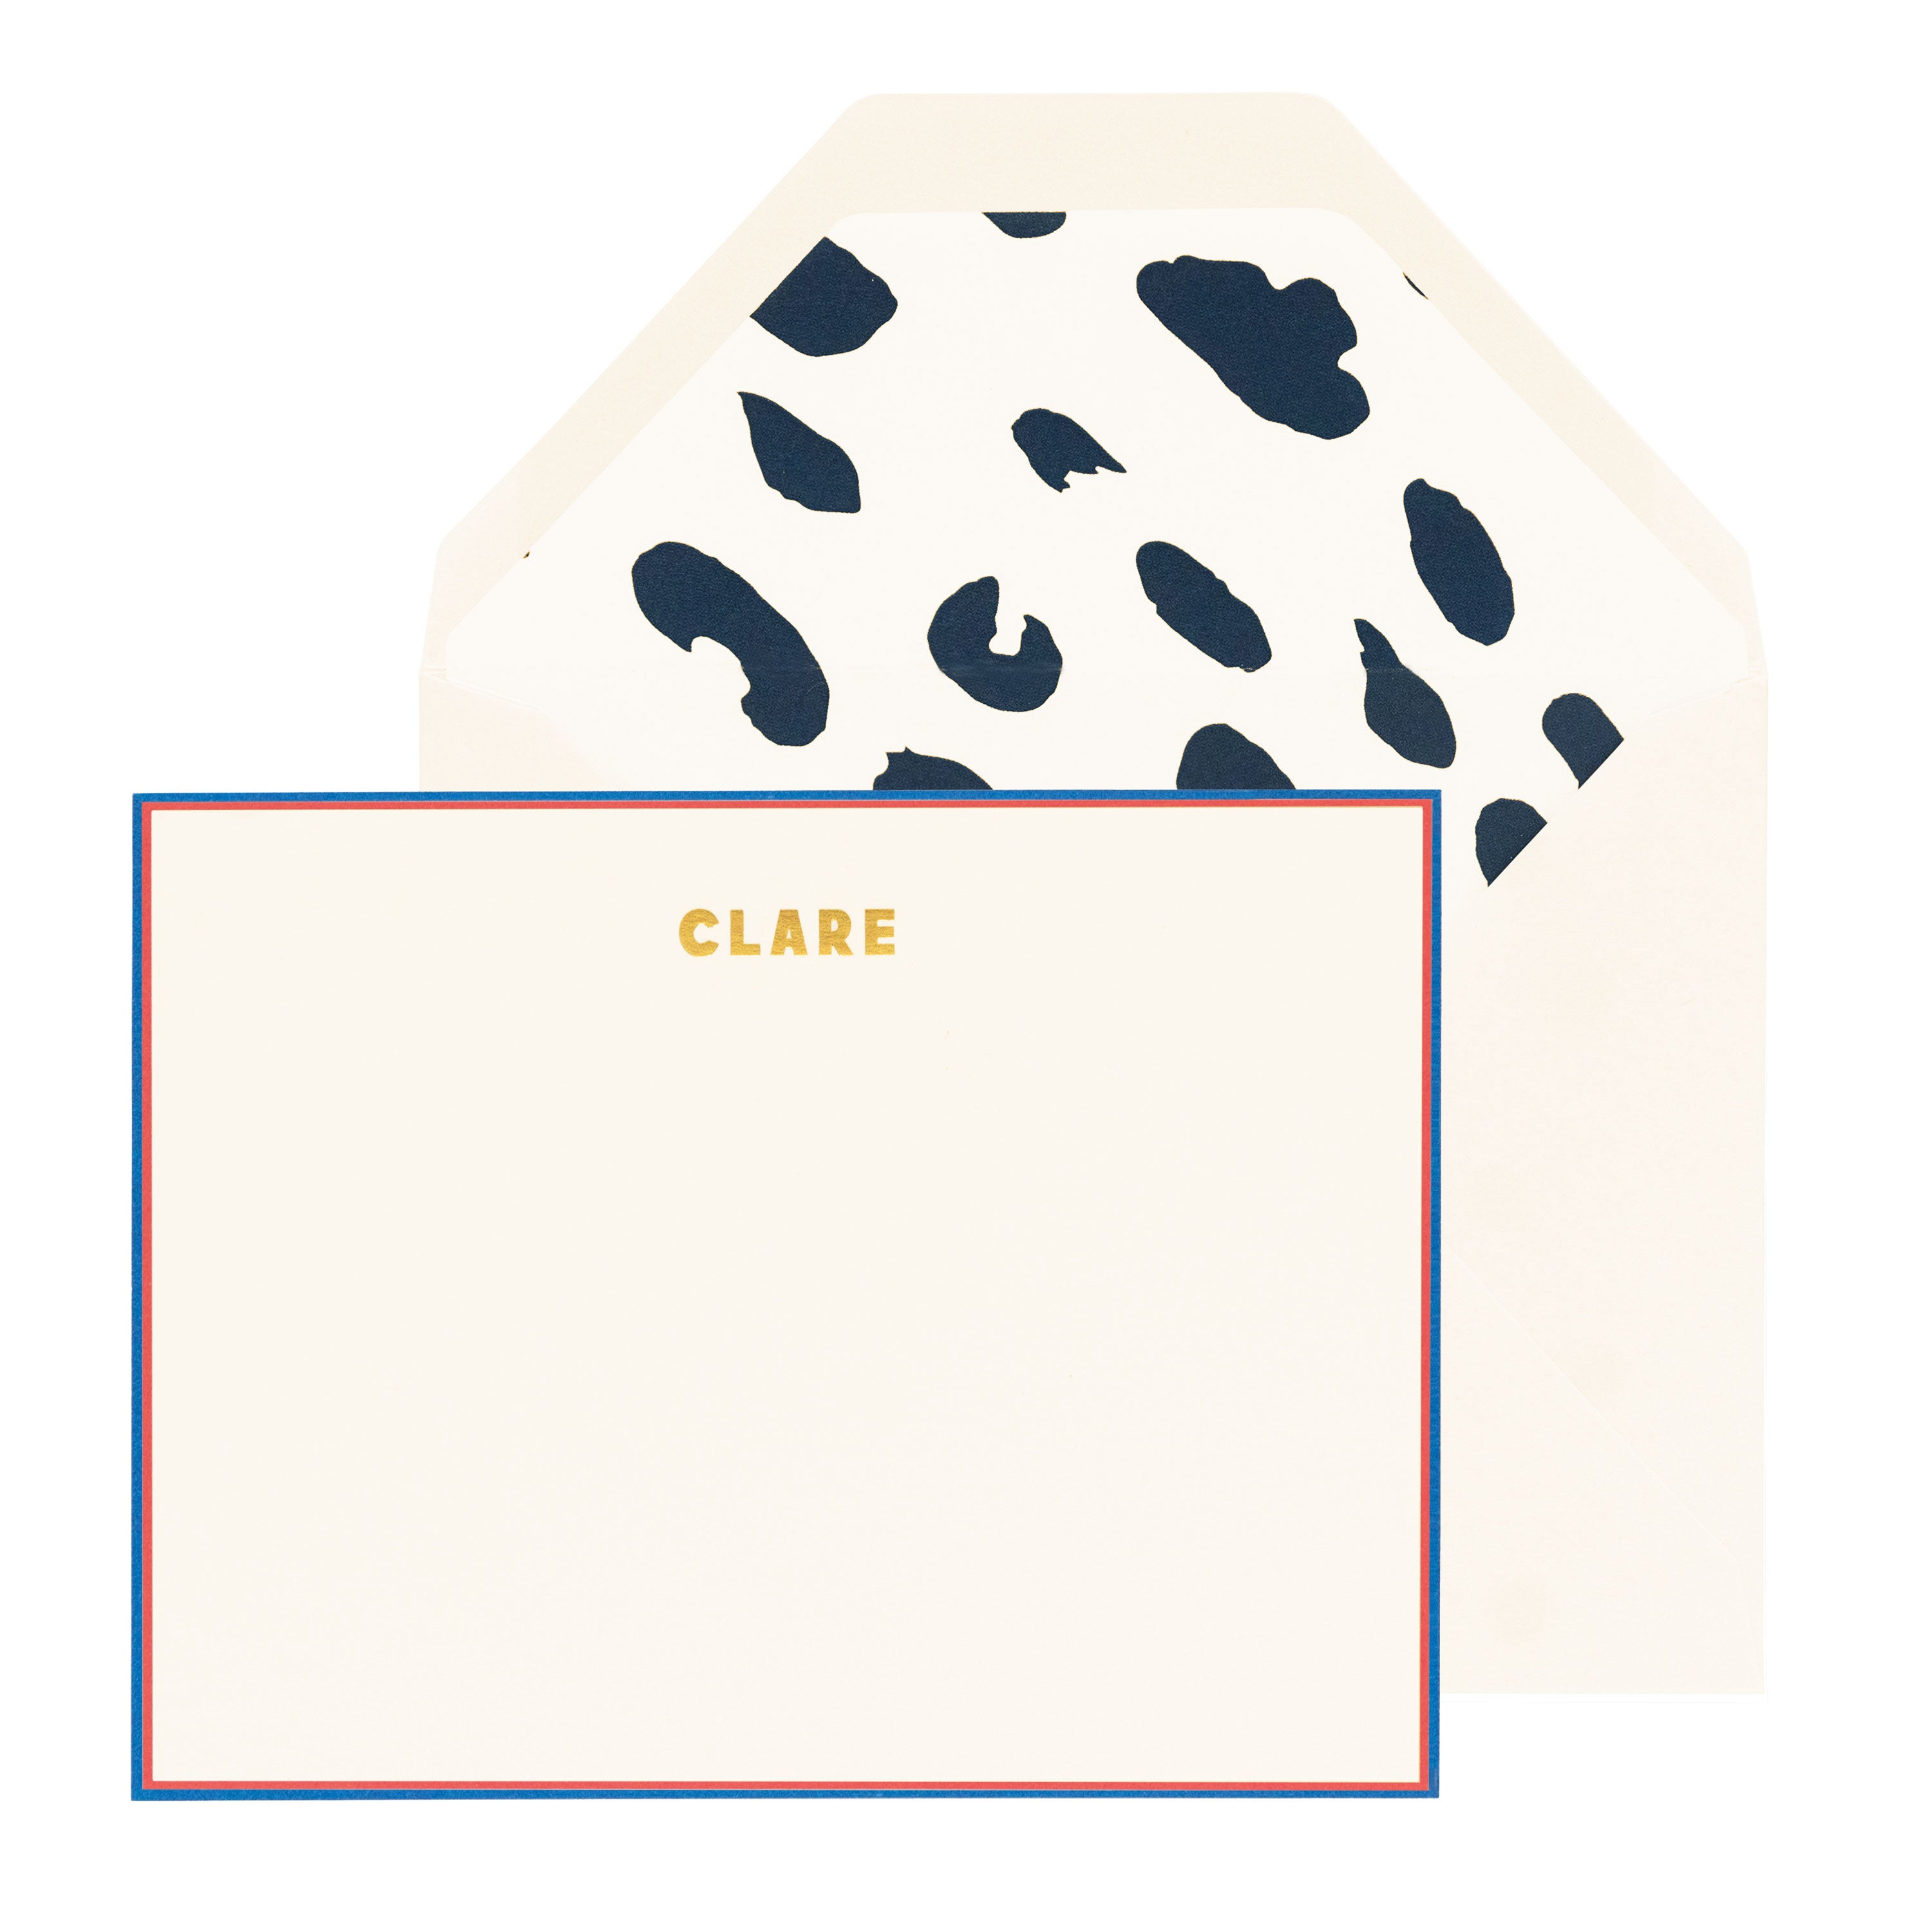 20% Off Clare V